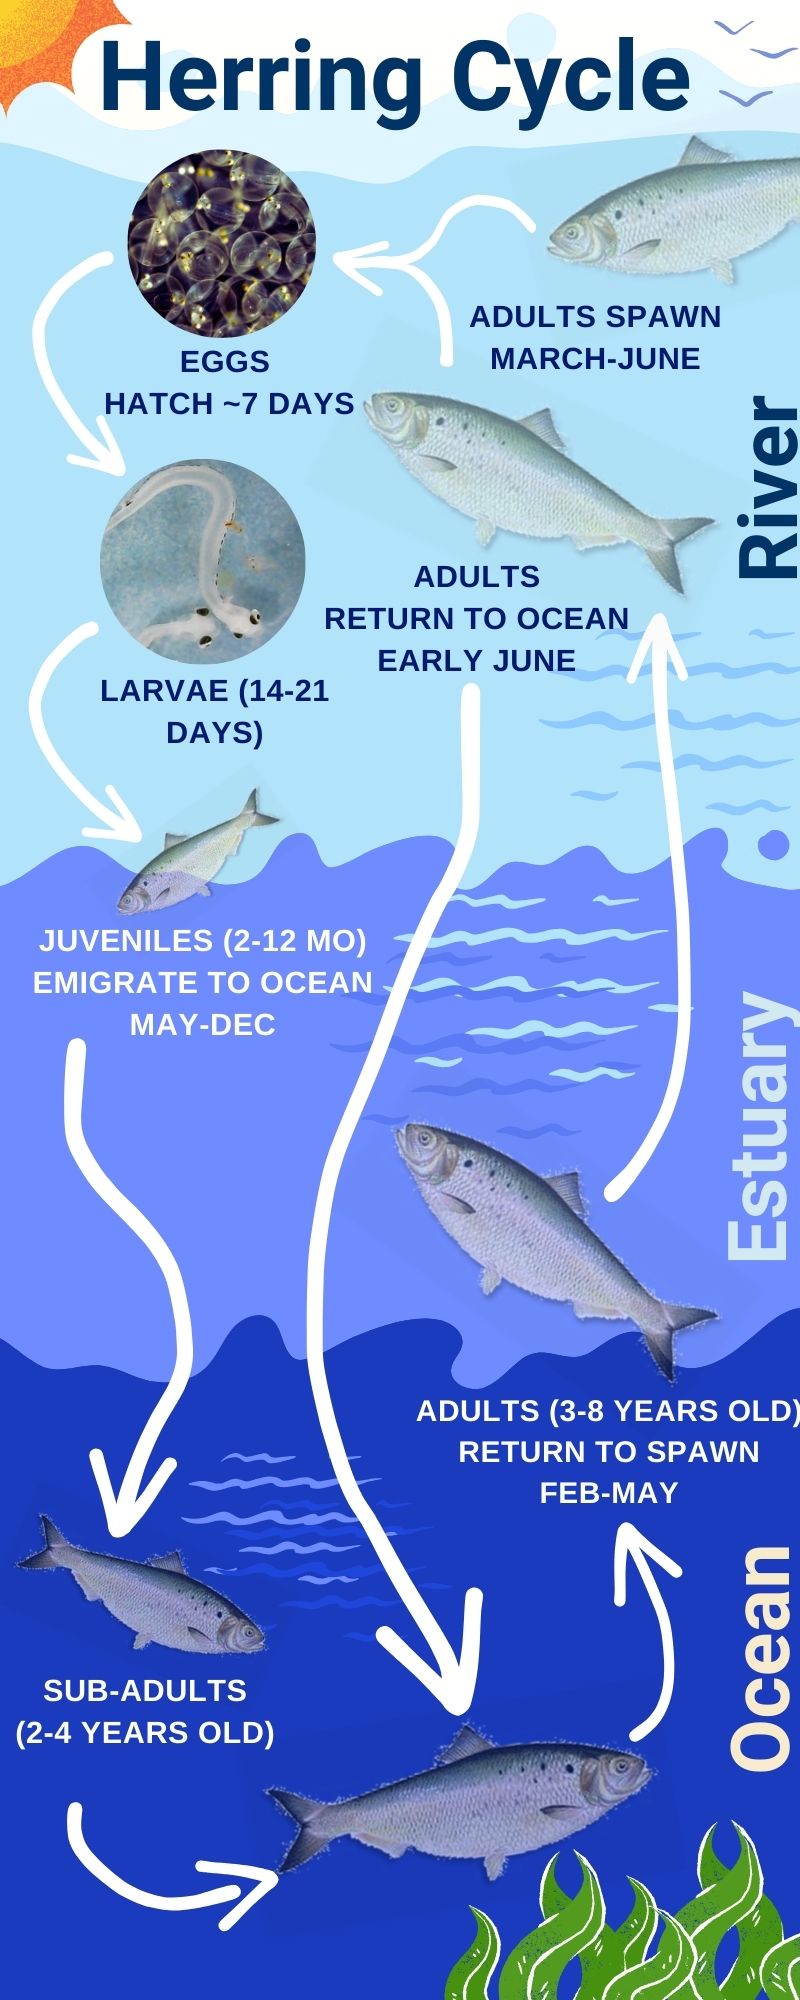 A graphic explaining the herring fish cycle, starting as eggs and developing into adult spawn. The life cycle takes place from river to estuary to ocean and back again.